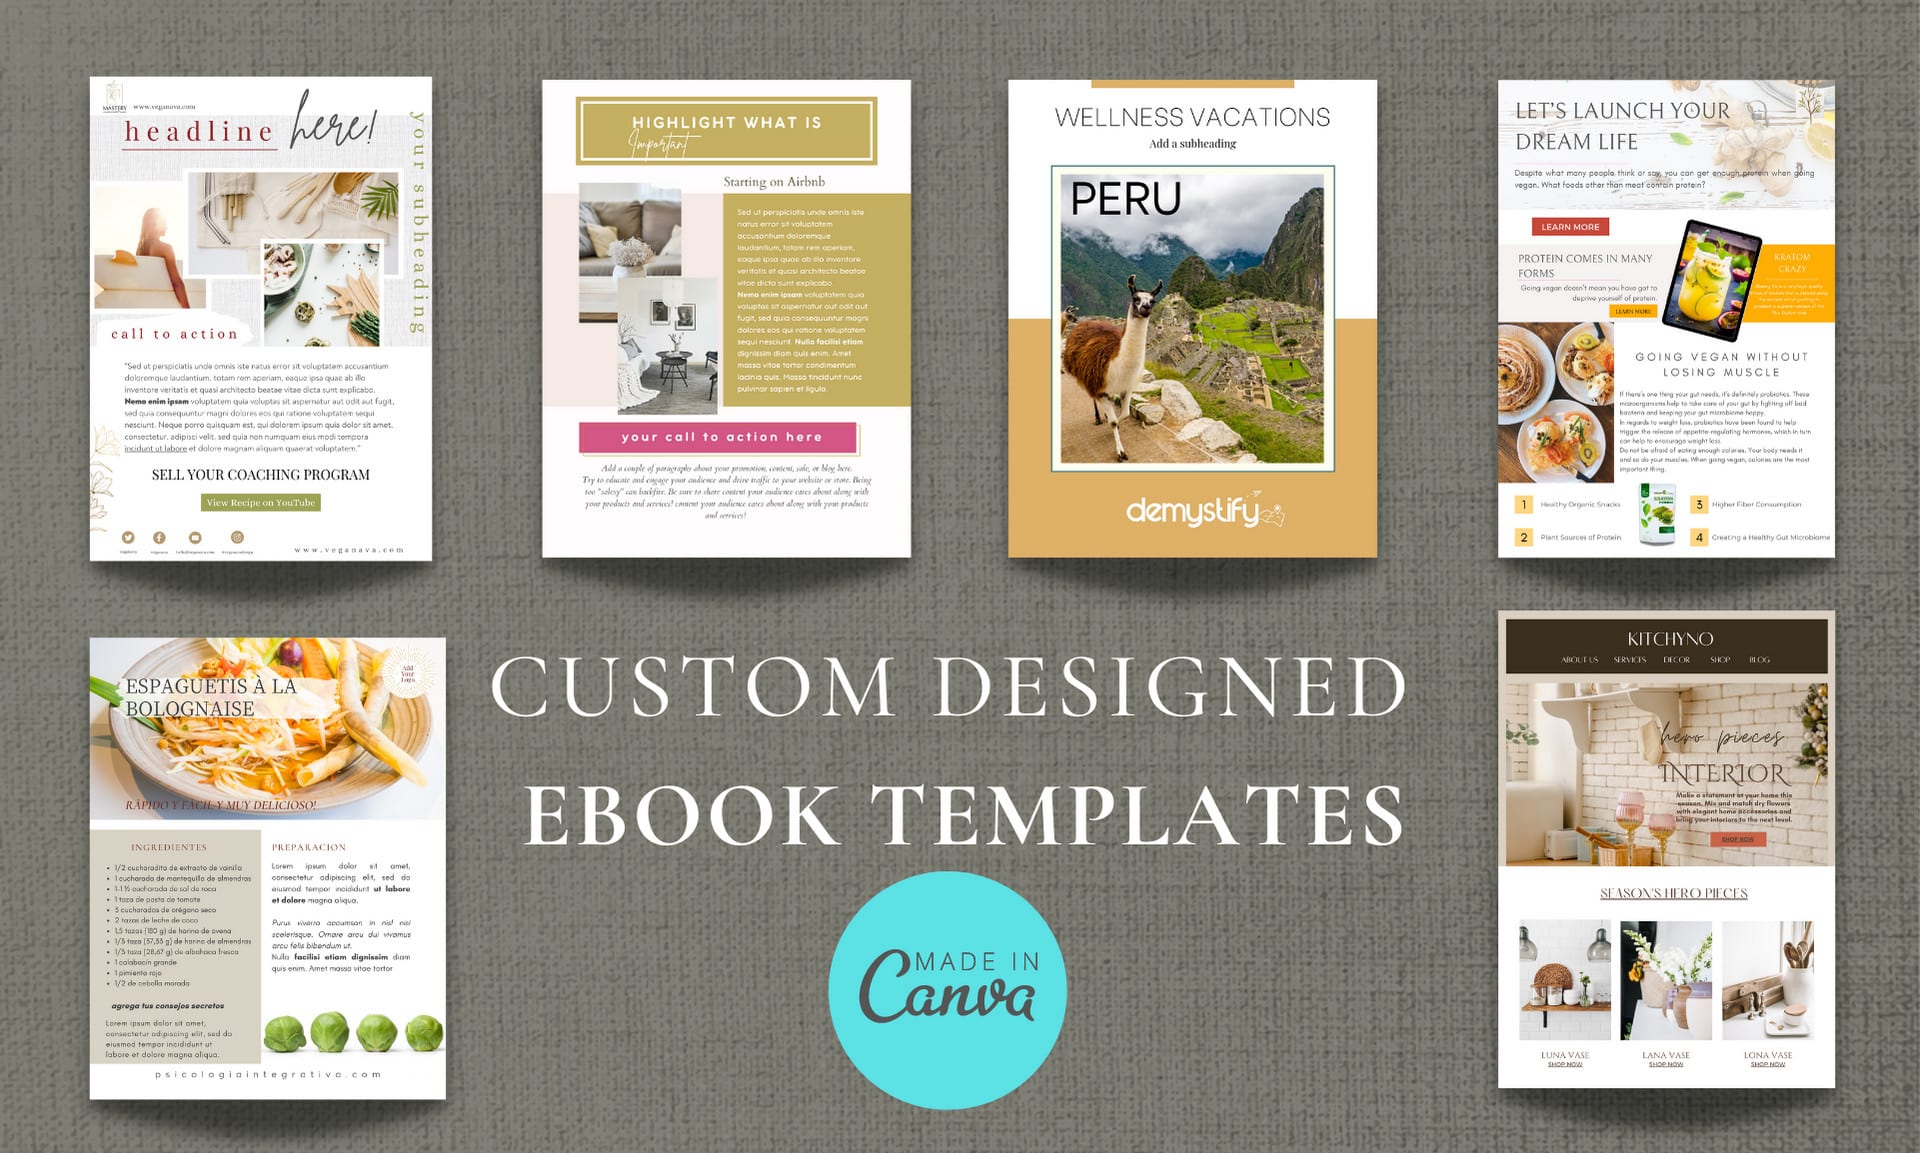 HOW TO CREATE AN EBOOK IN CANVA 